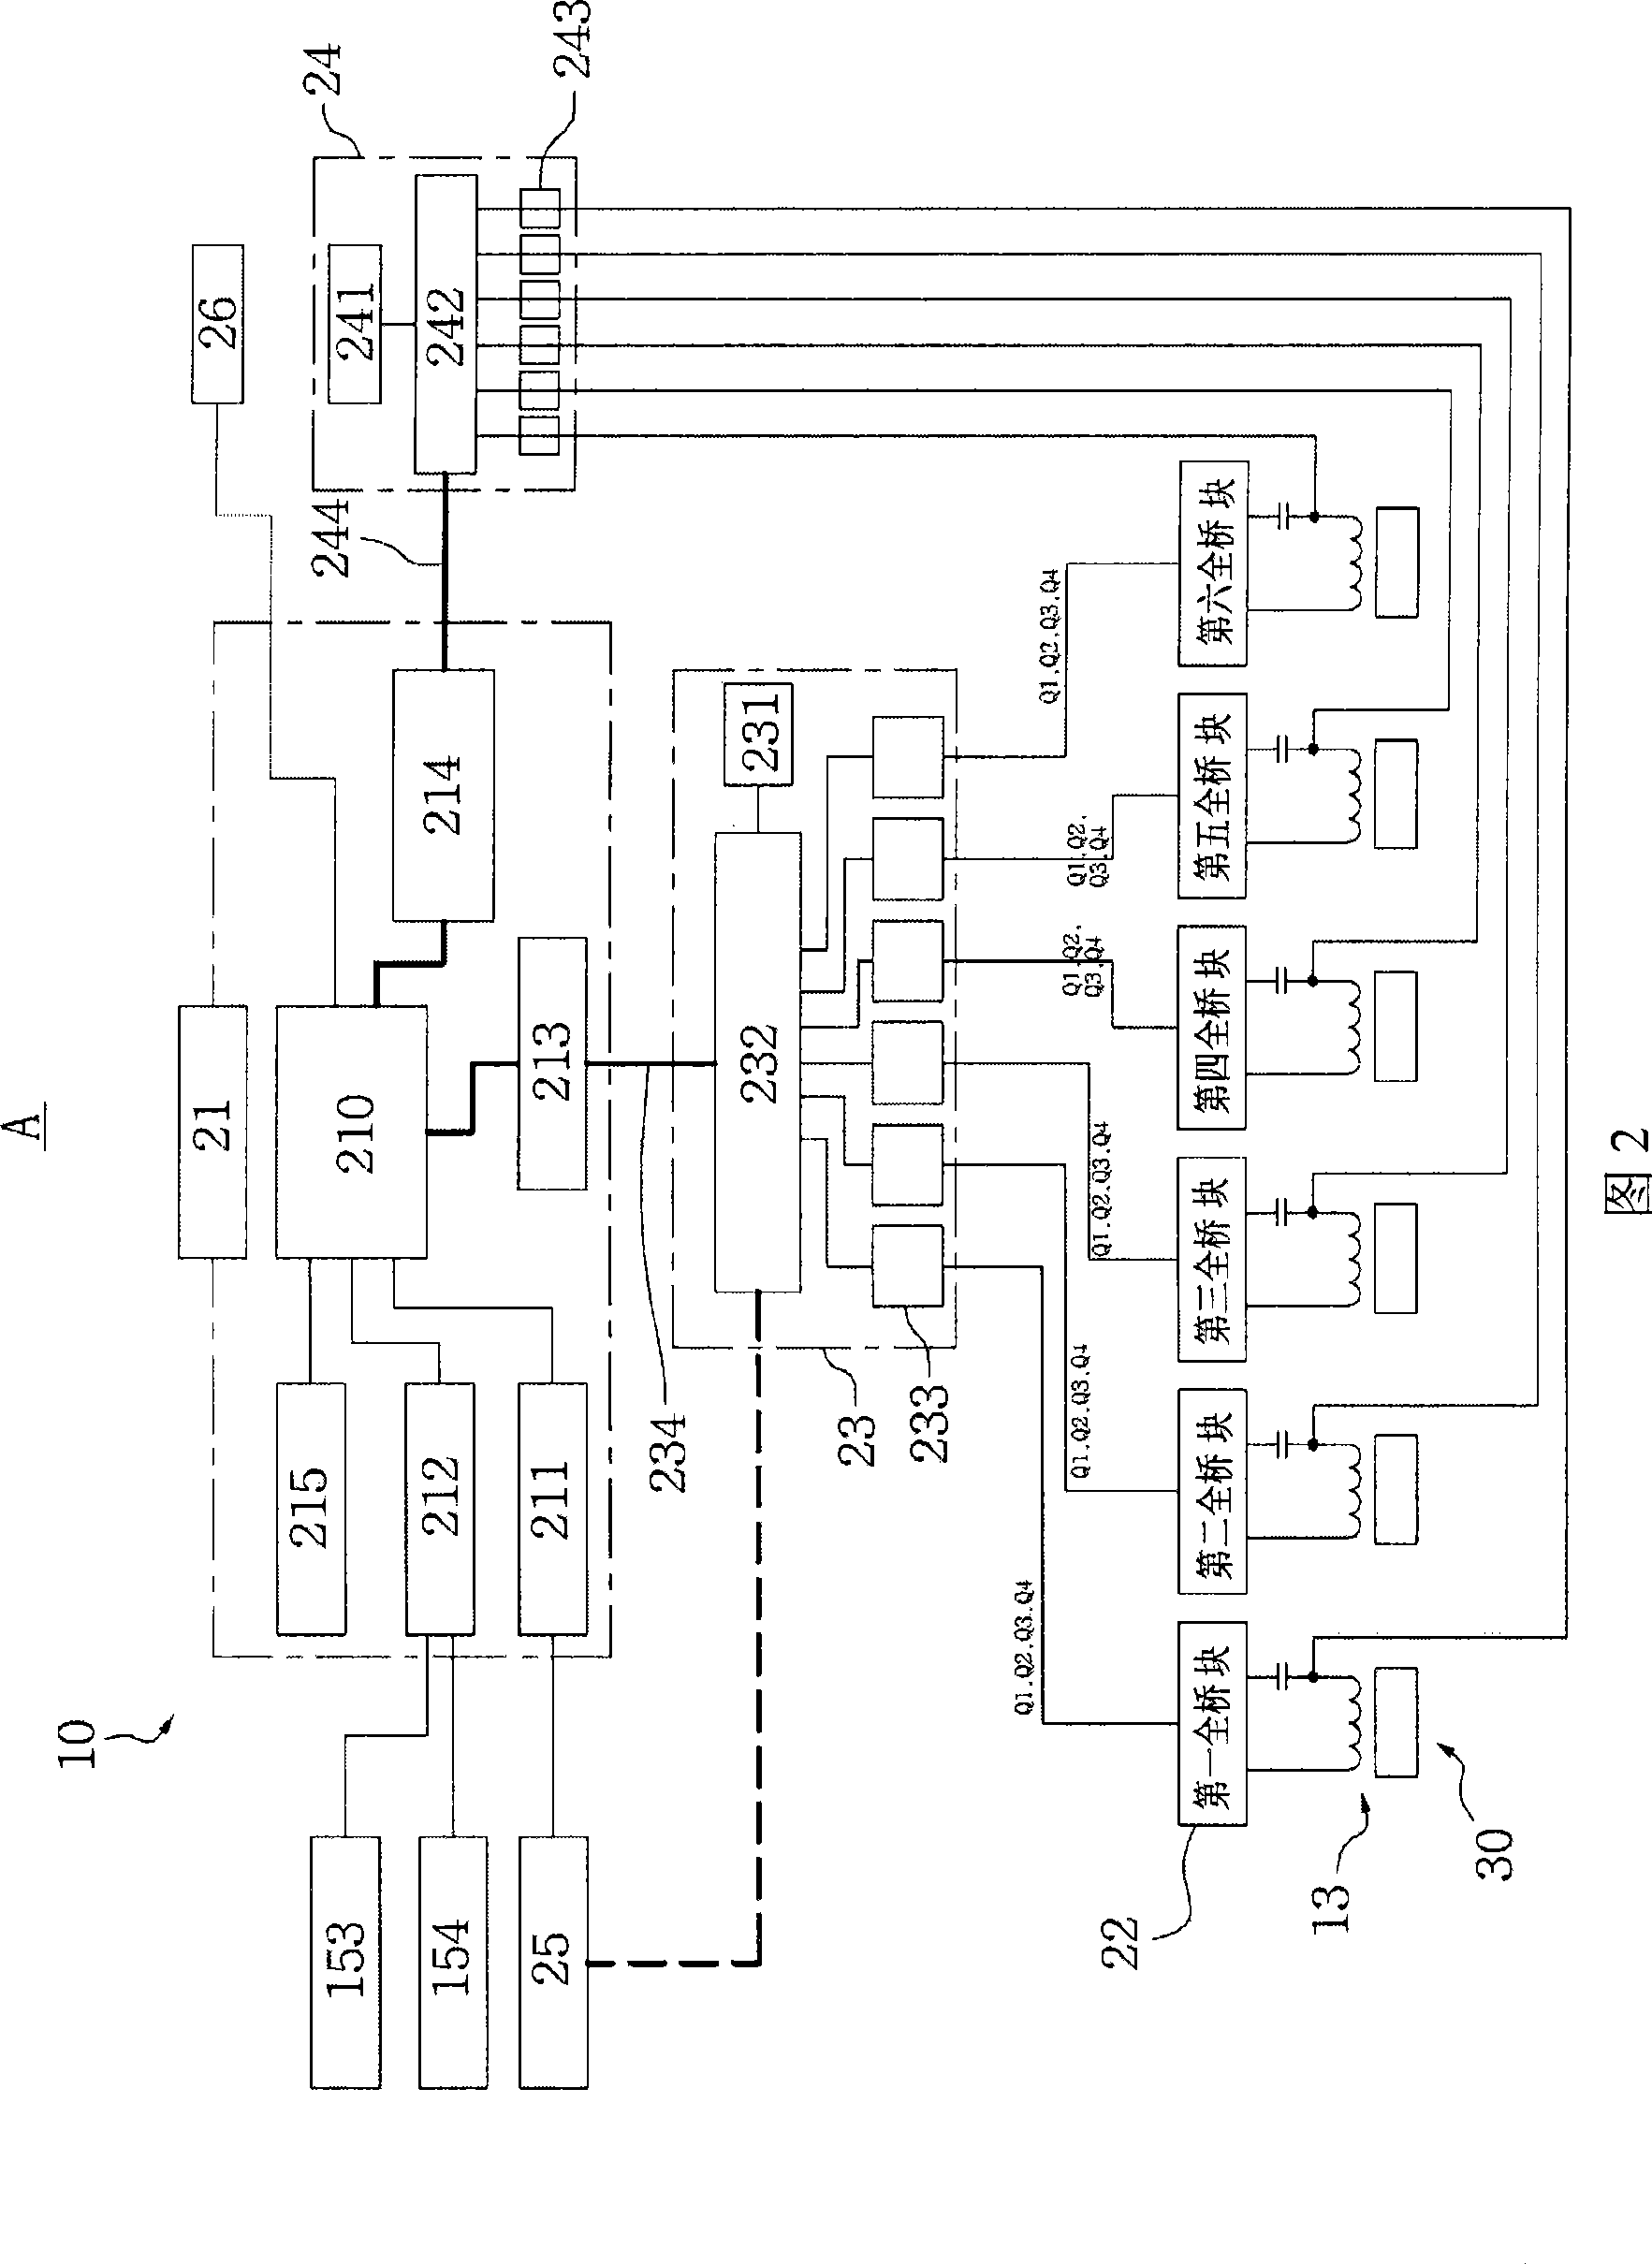 Contactless multi-charger system and controlling method thereof